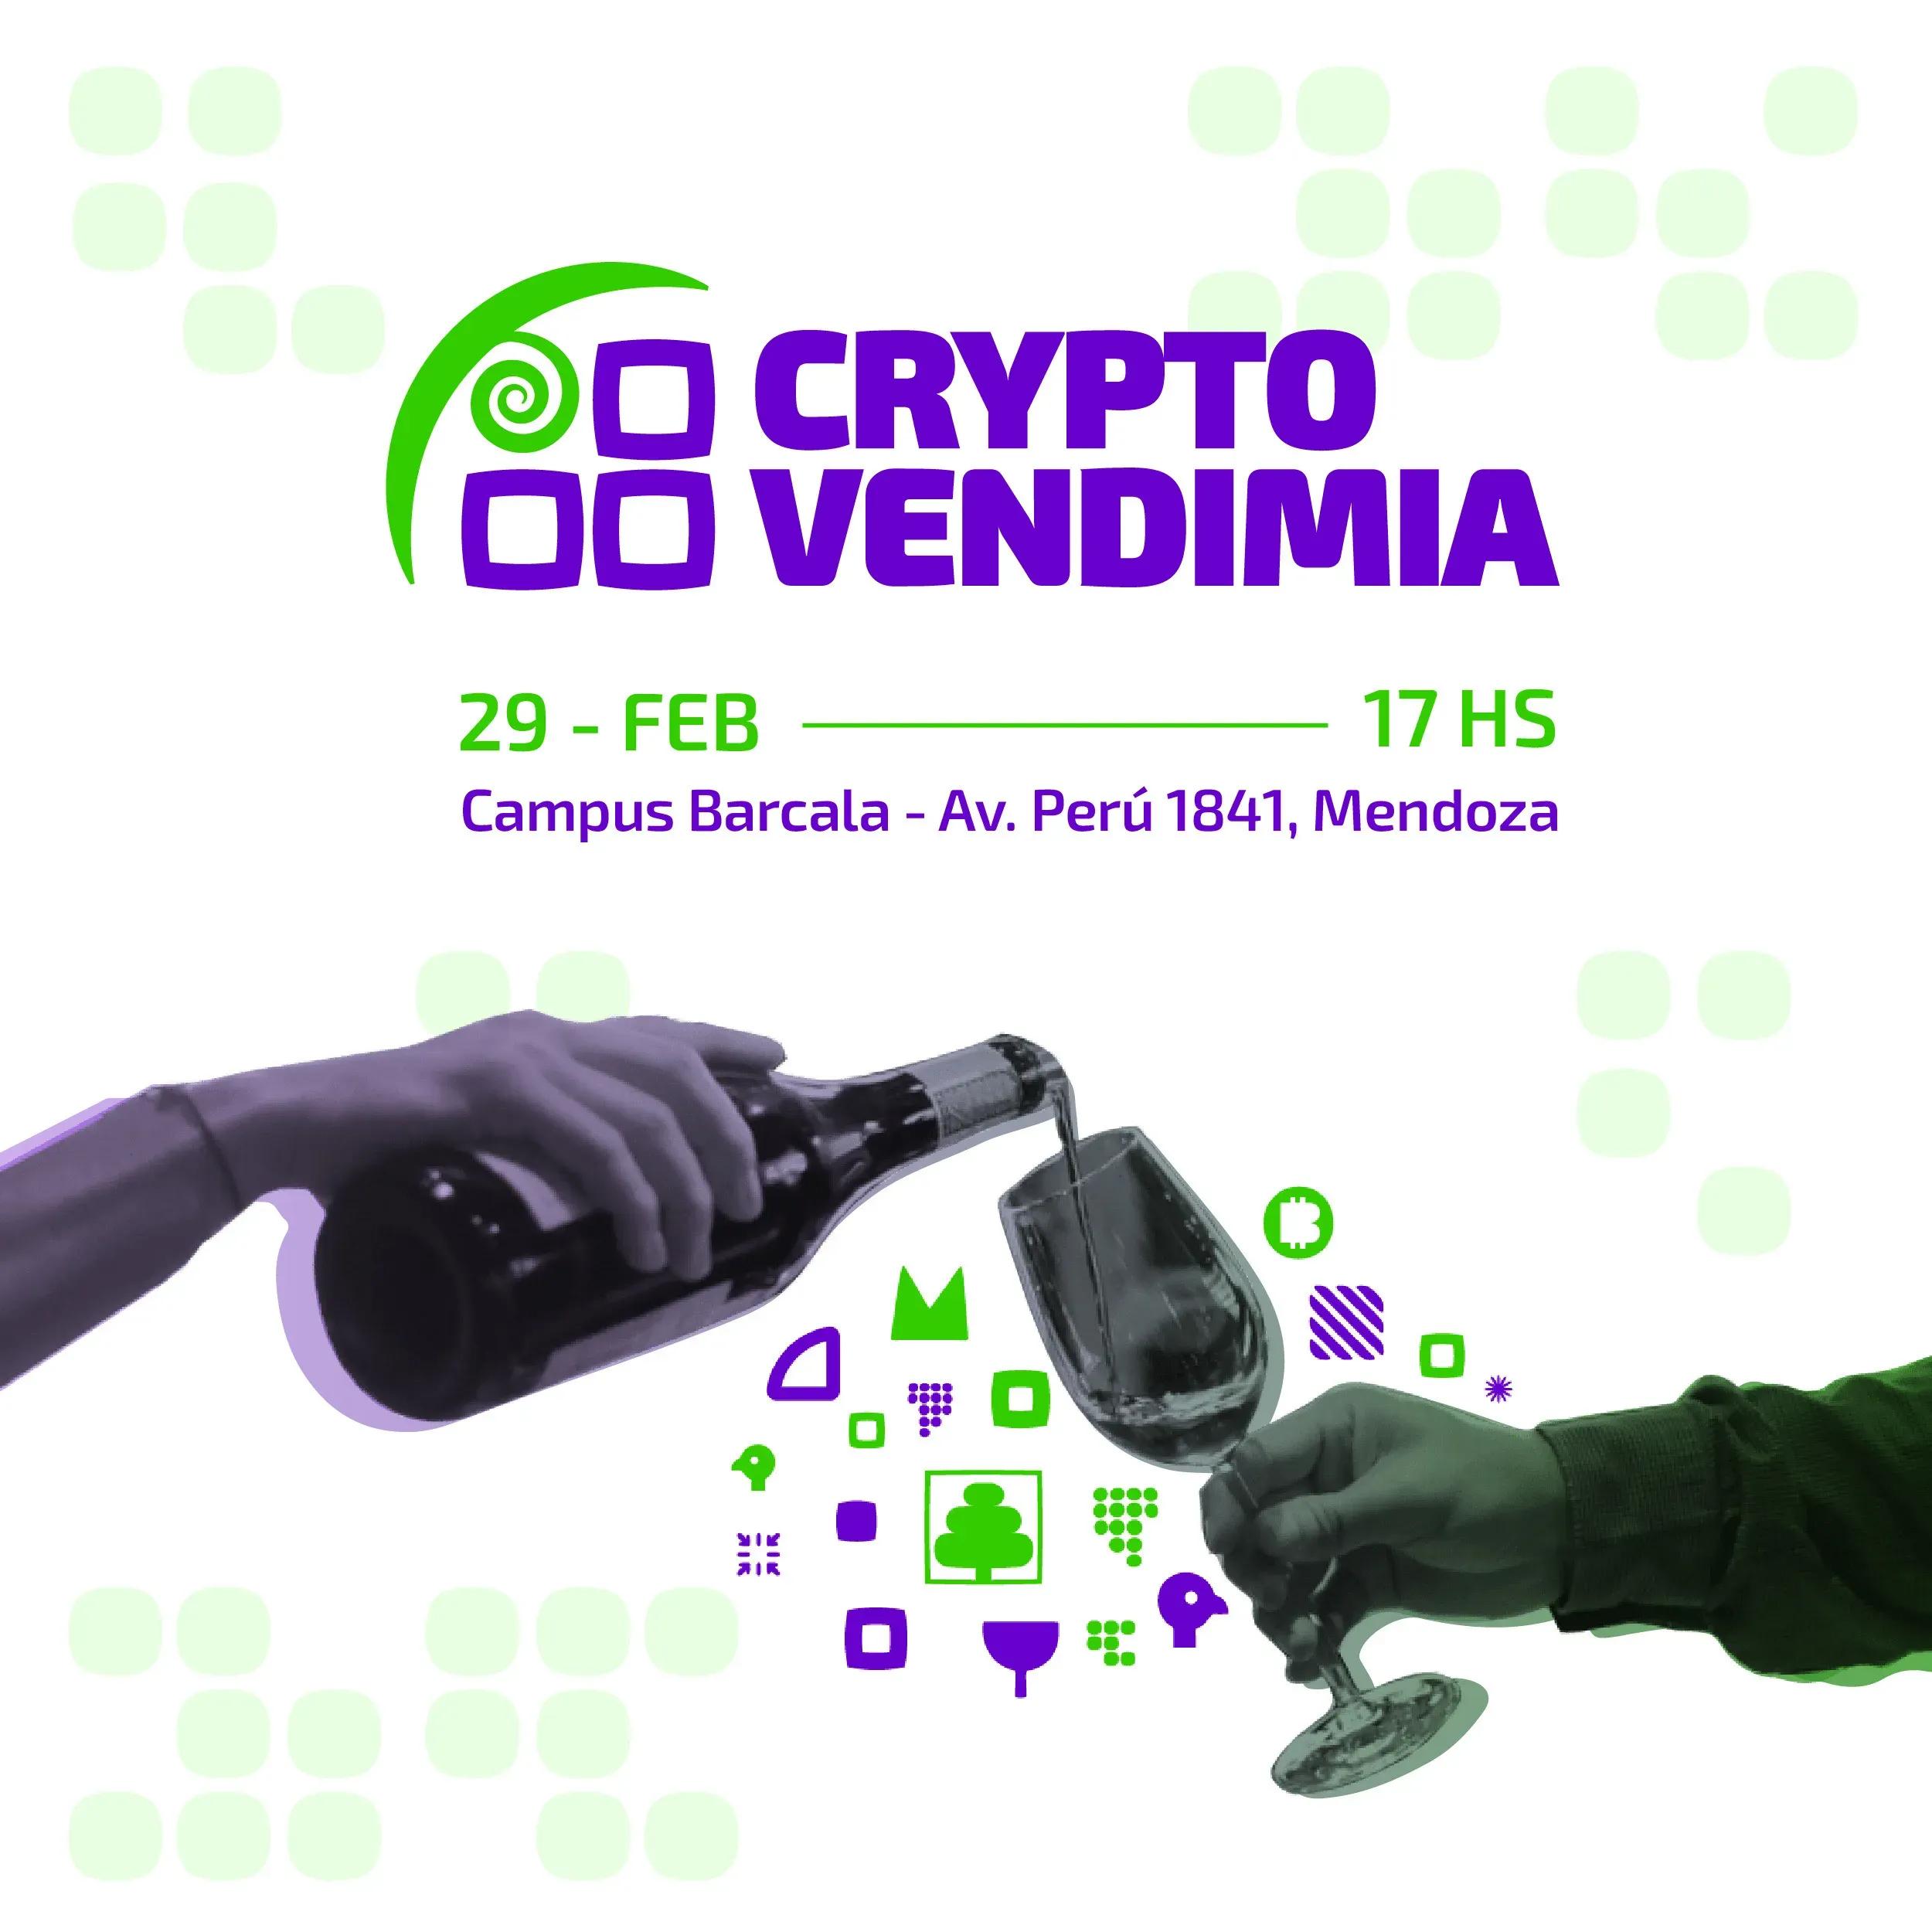 Evento Crypto is of cultural interest for the province of Mendoza.